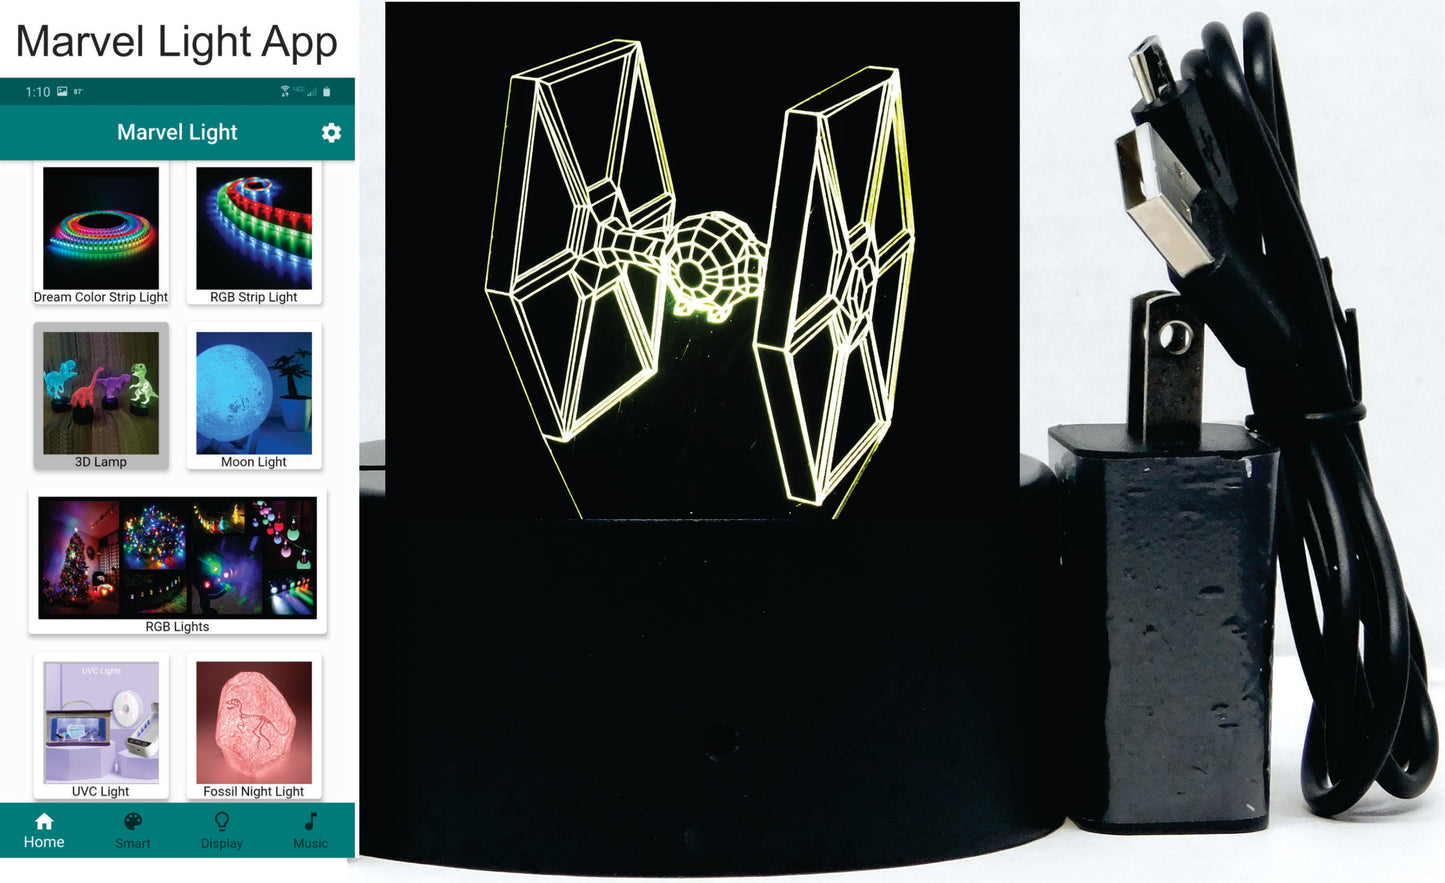 Tie Fighter 3-D Optical Illusion LED Multicolored Lamp